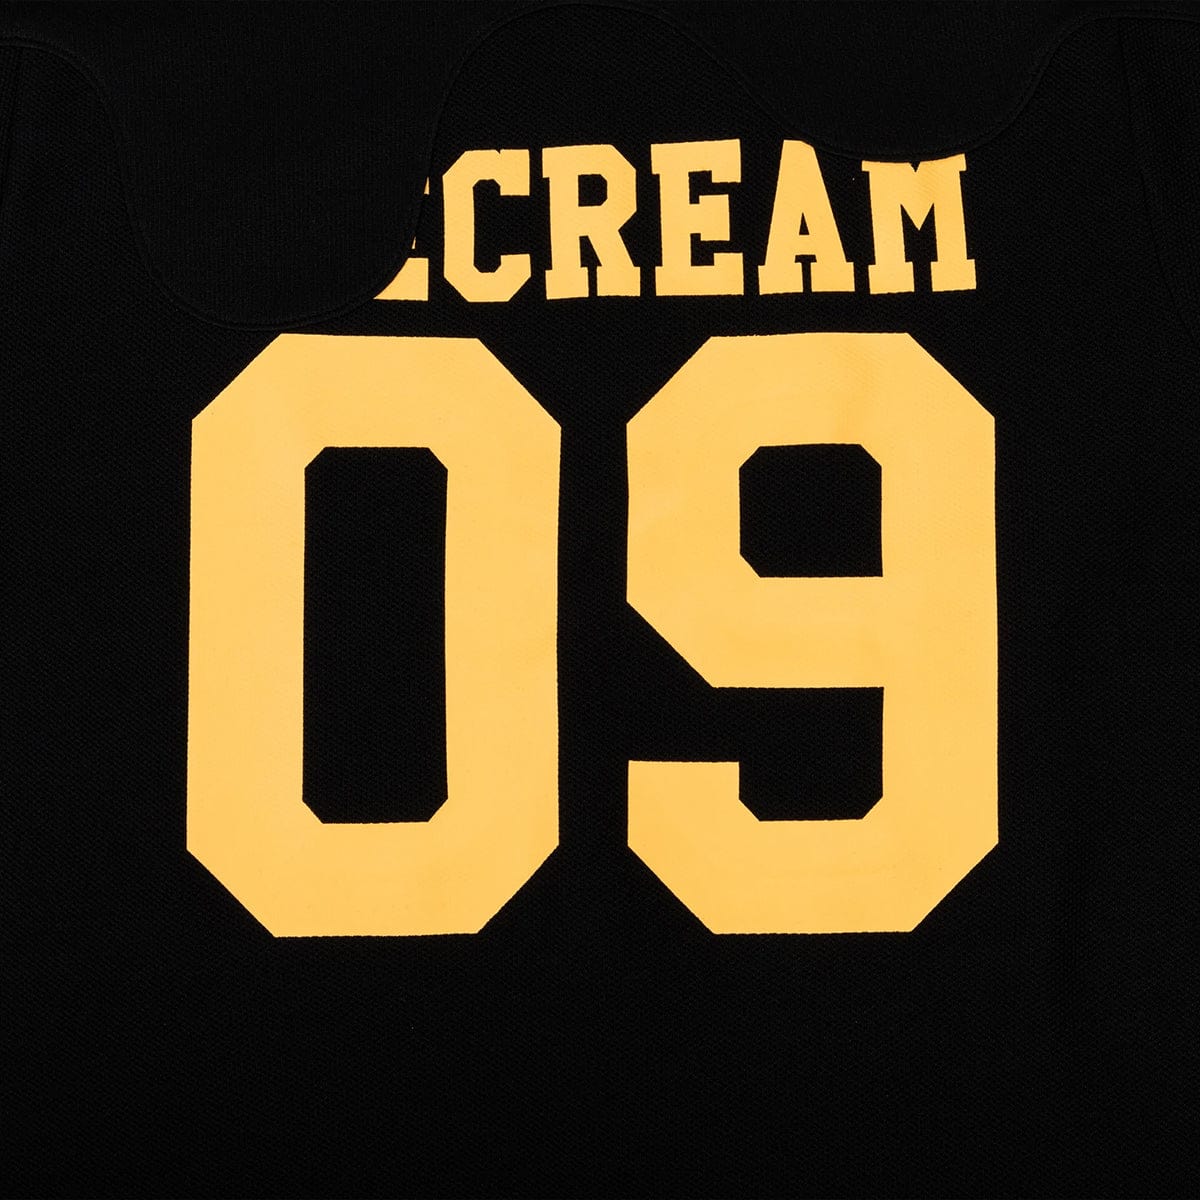 ICECREAM T-Shirts END CONE JERSEY